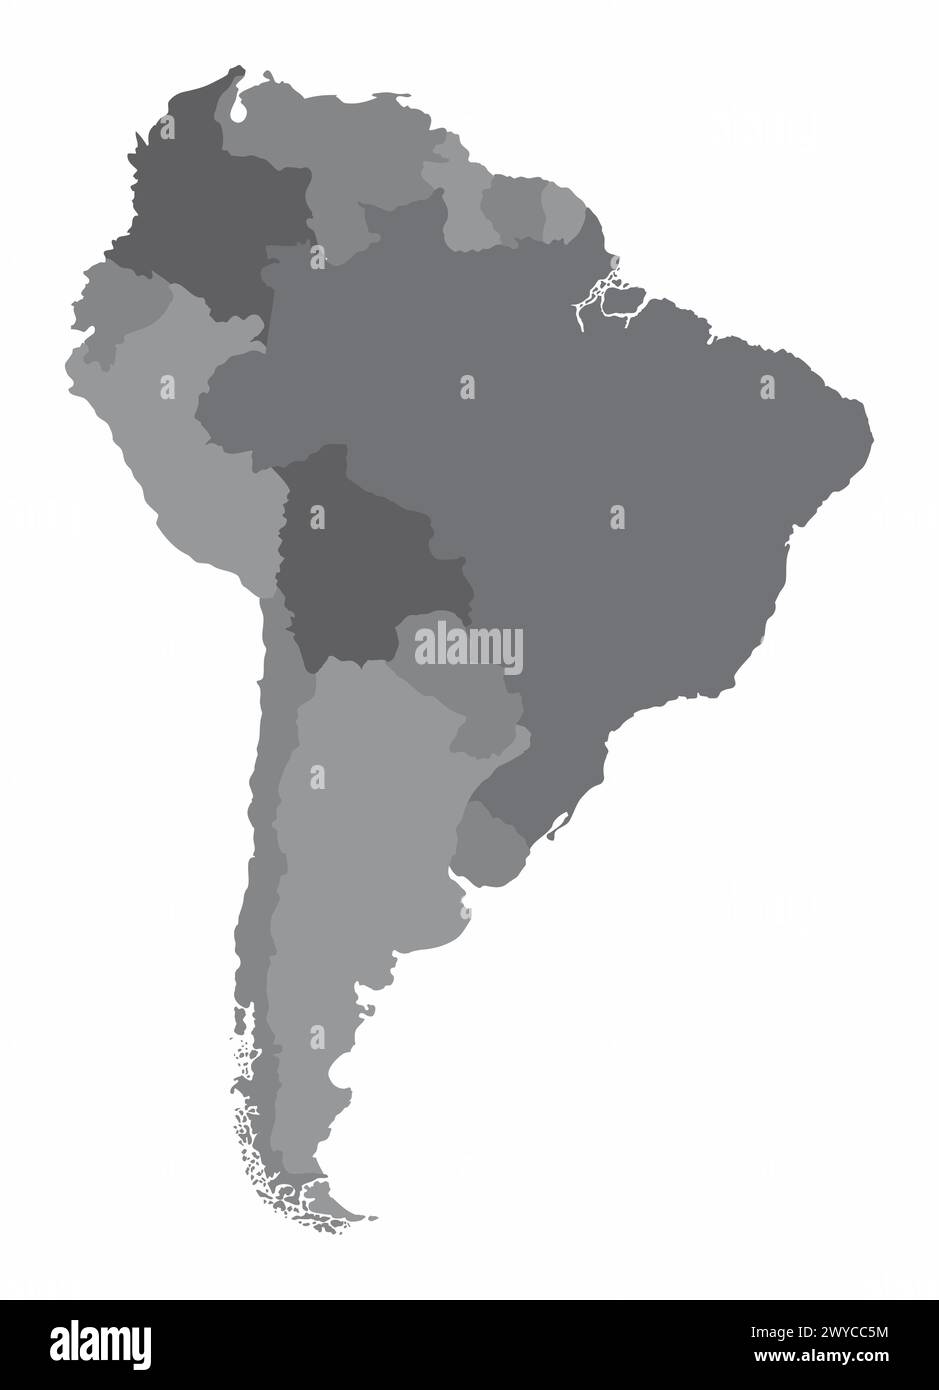 The grayscale map of South America isolated on white background Stock Vector